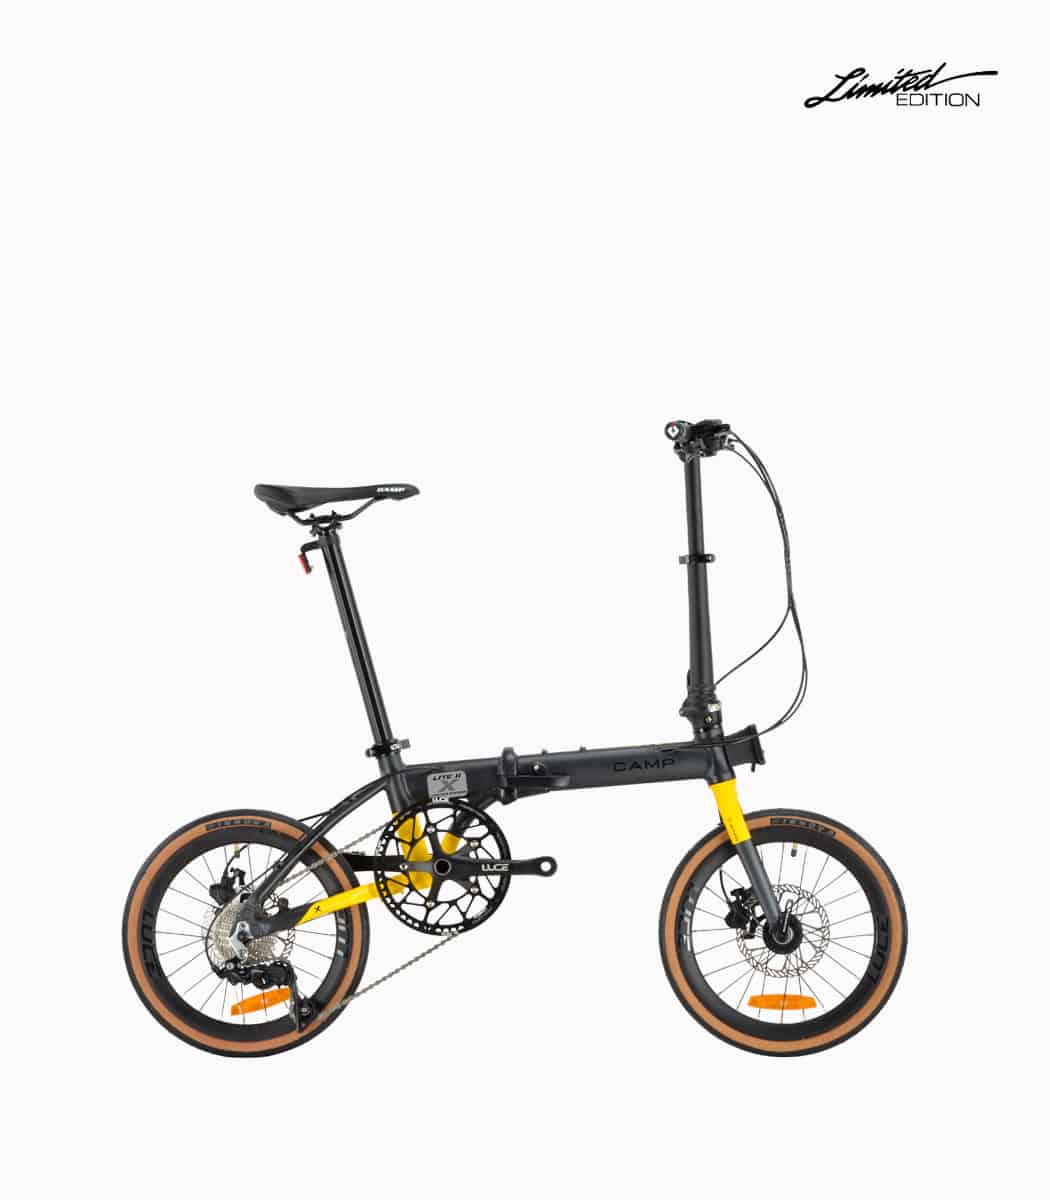 CAMP Lite 11X (BLACK-YELLOW) foldable bicycle right V1